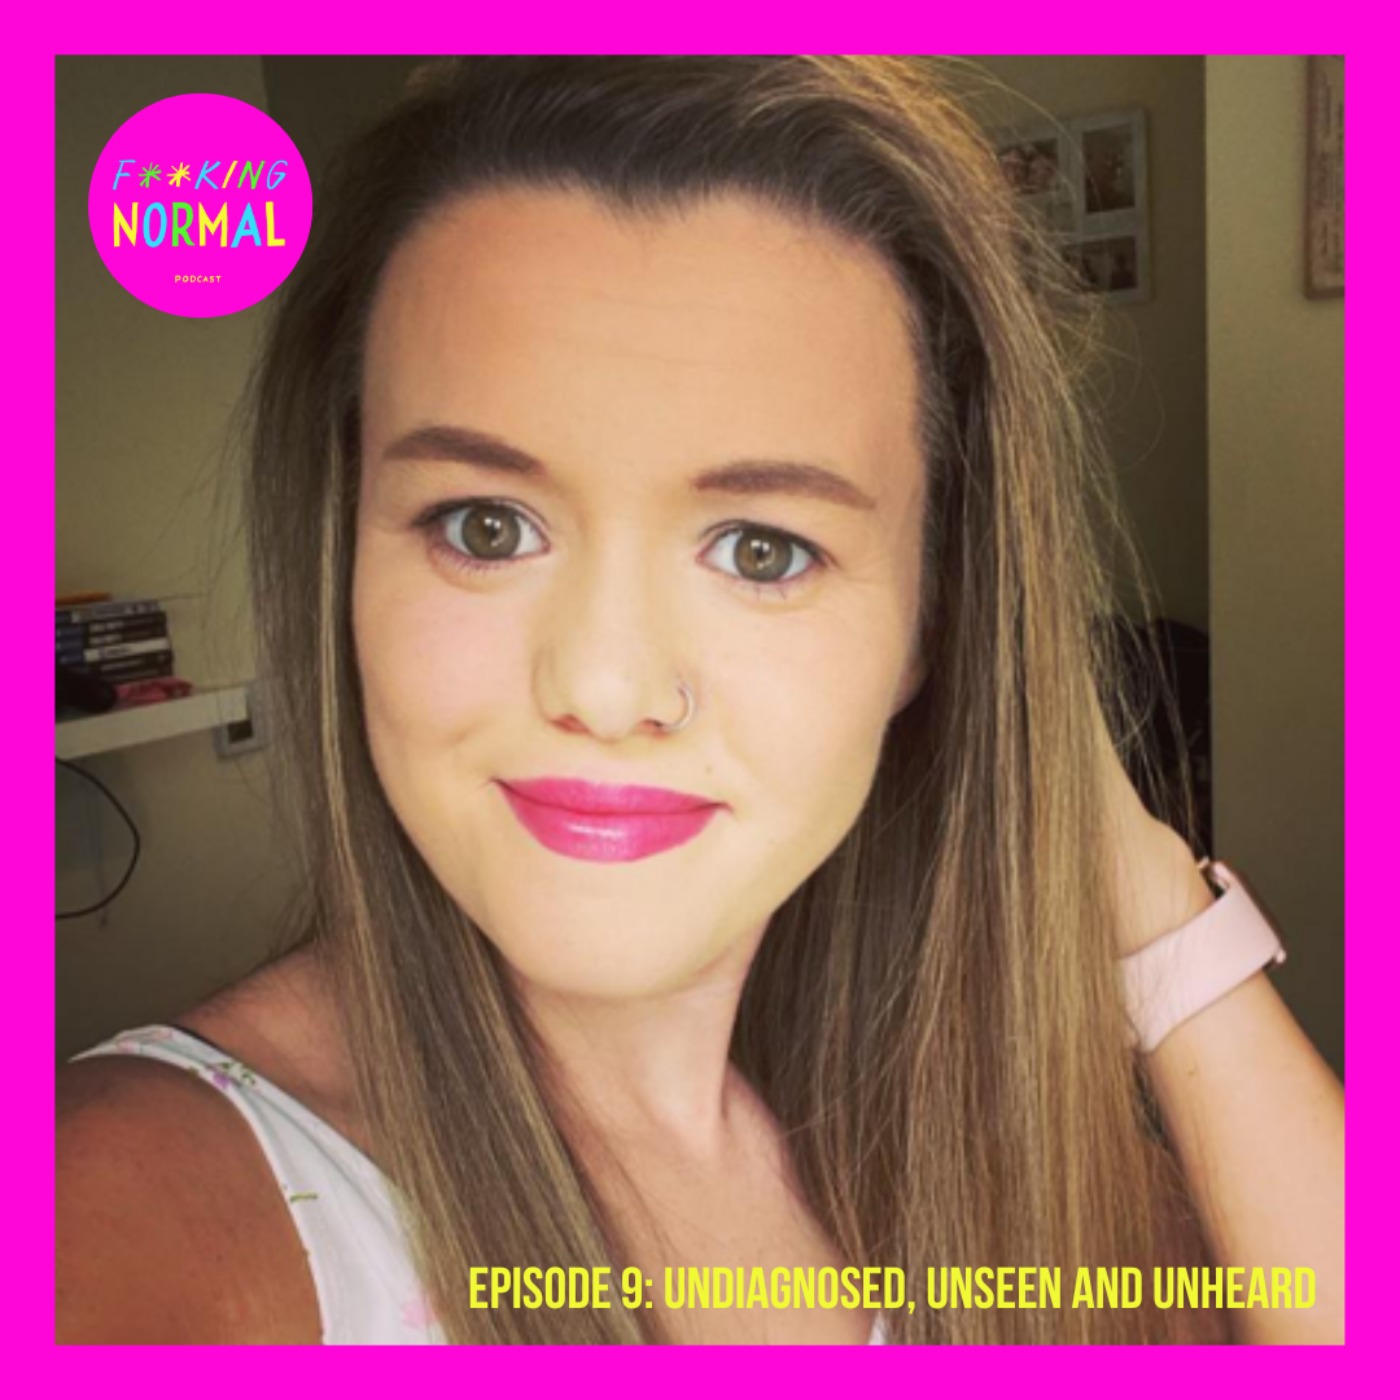 Ep 9: Undiagnosed, unseen and unheard with Jazz Manley